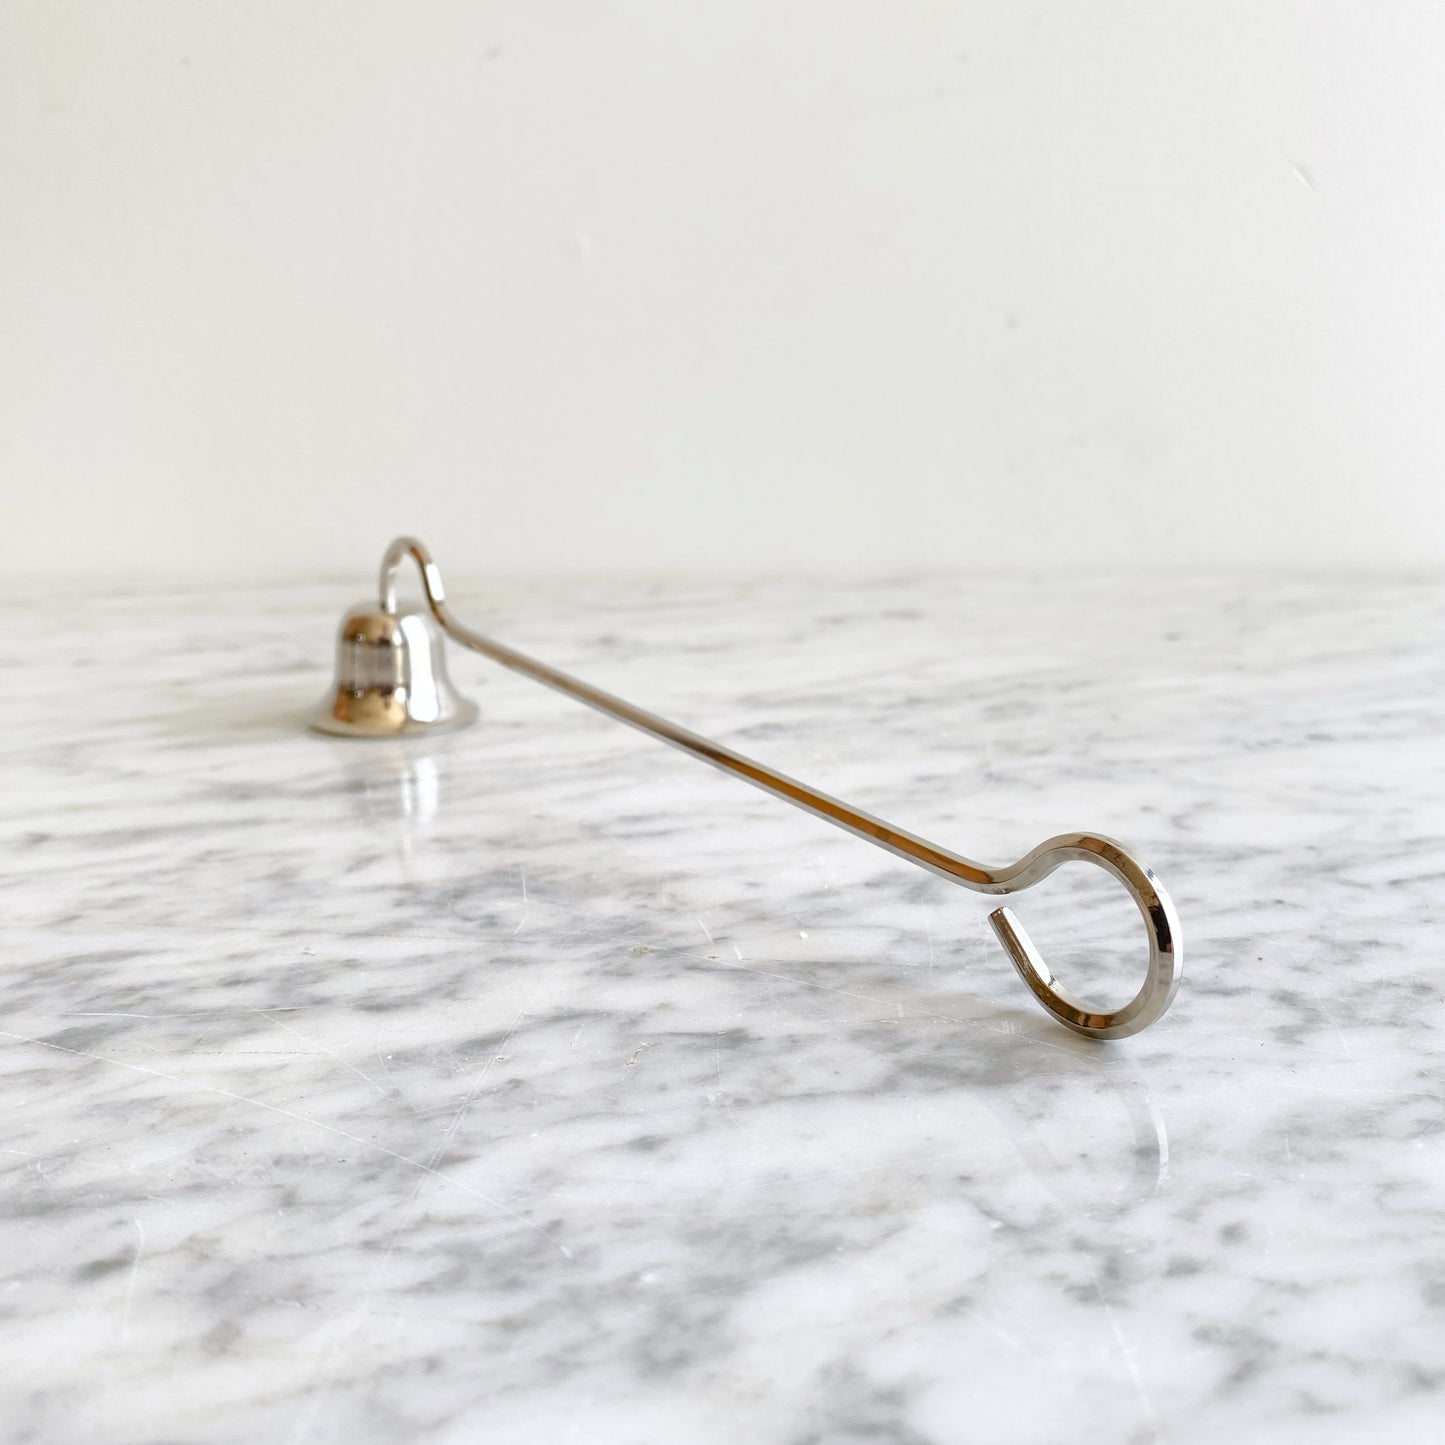 Vintage Silver-plated Candle Snuffer